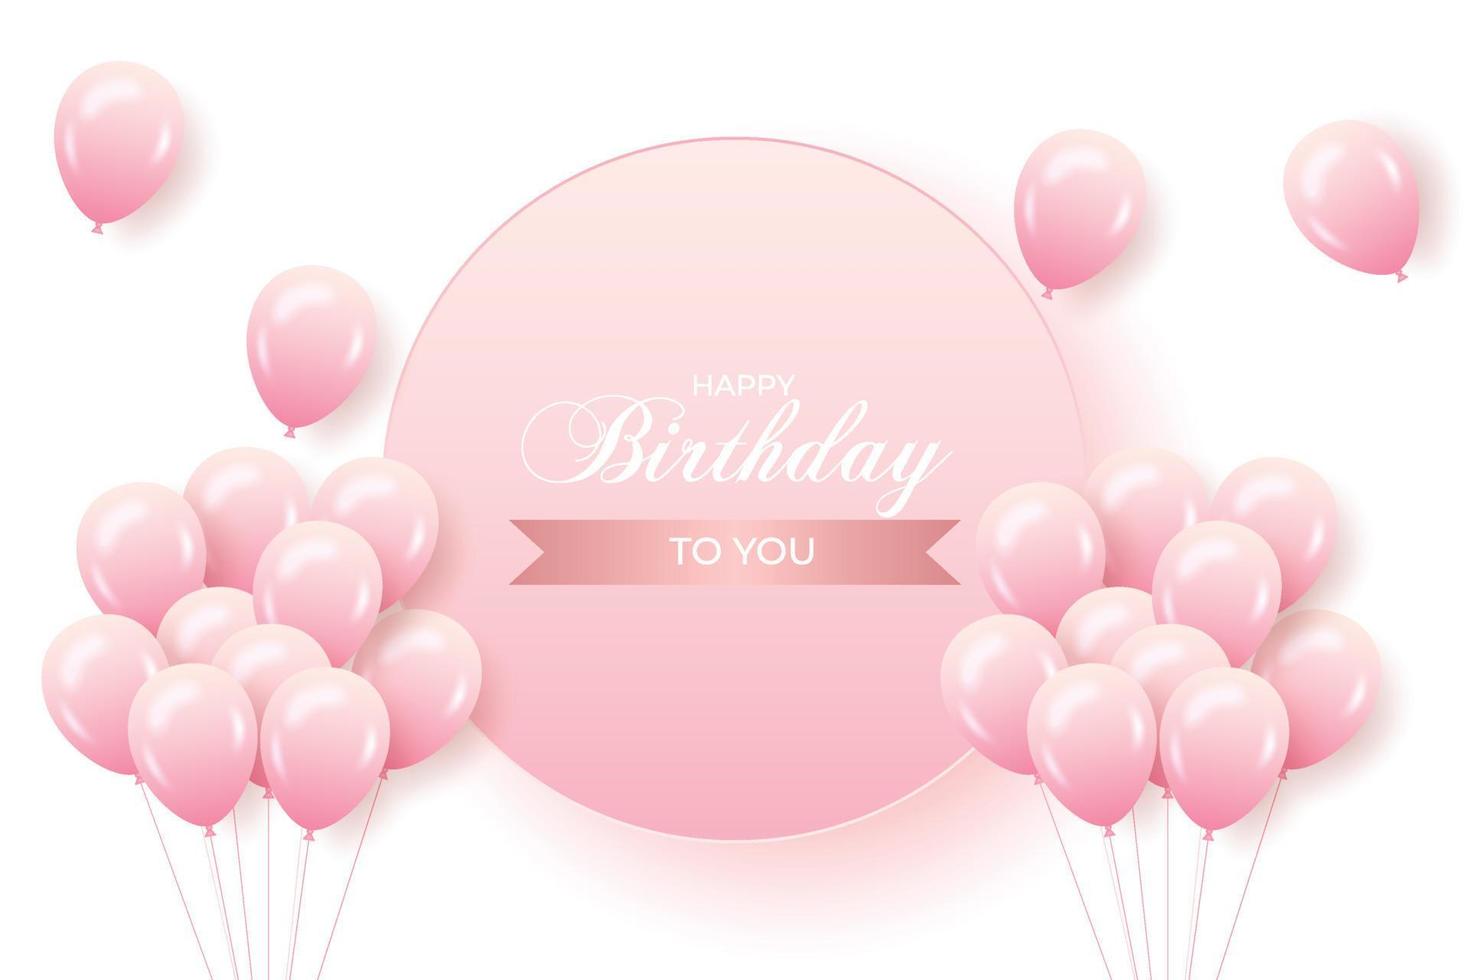 Happy Birthday with pink balloons and pink background vector